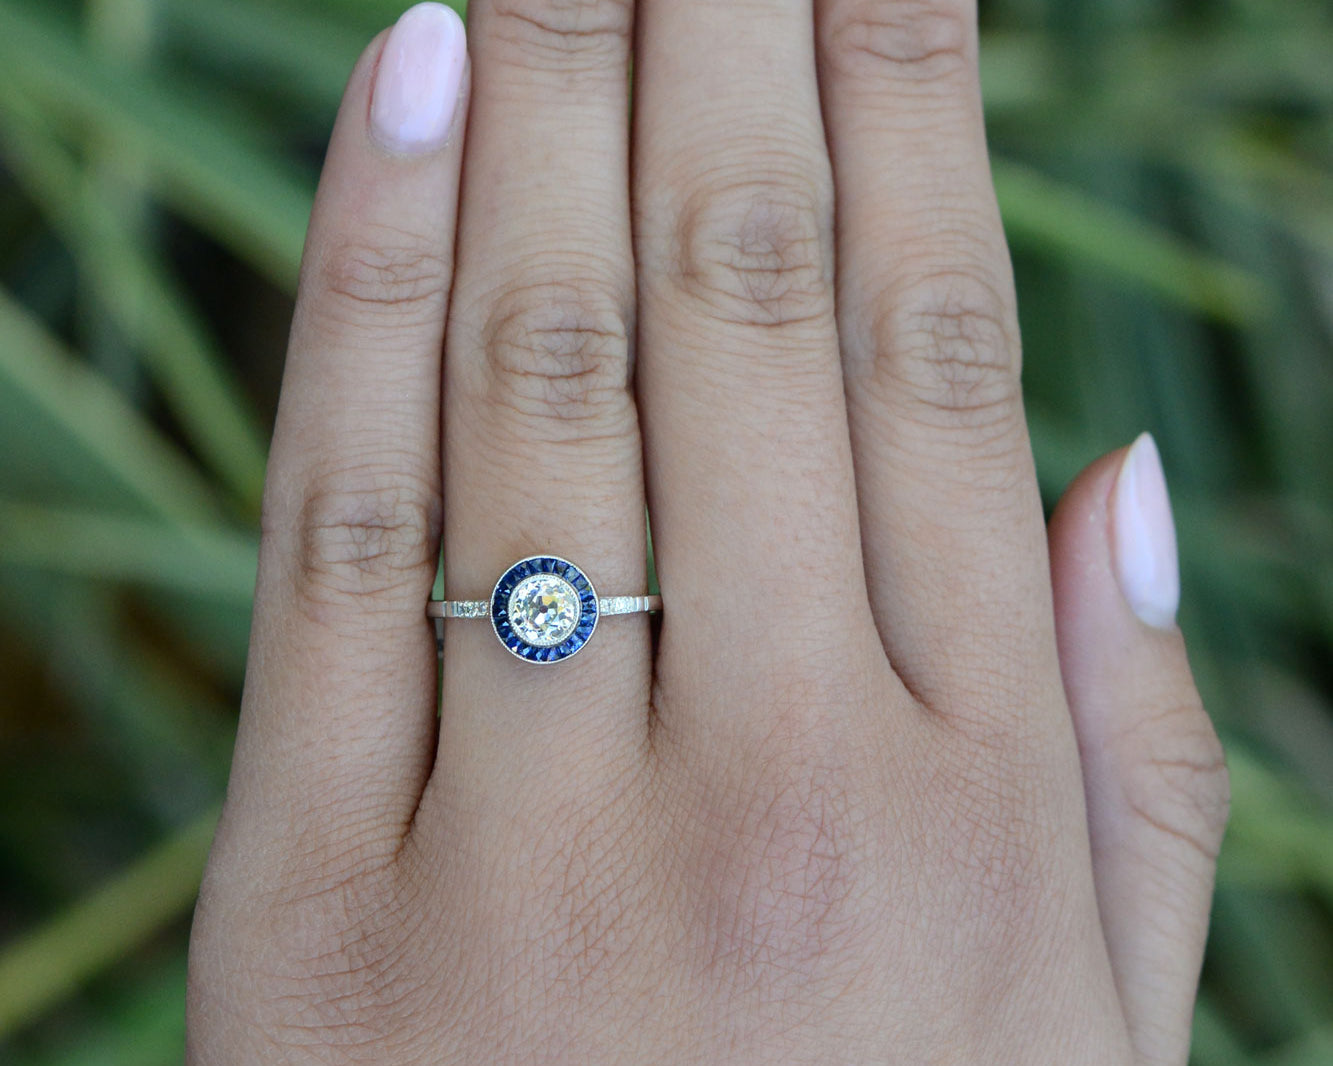 Art Deco Style Antique Diamond and Sapphire Halo Engagement Ring